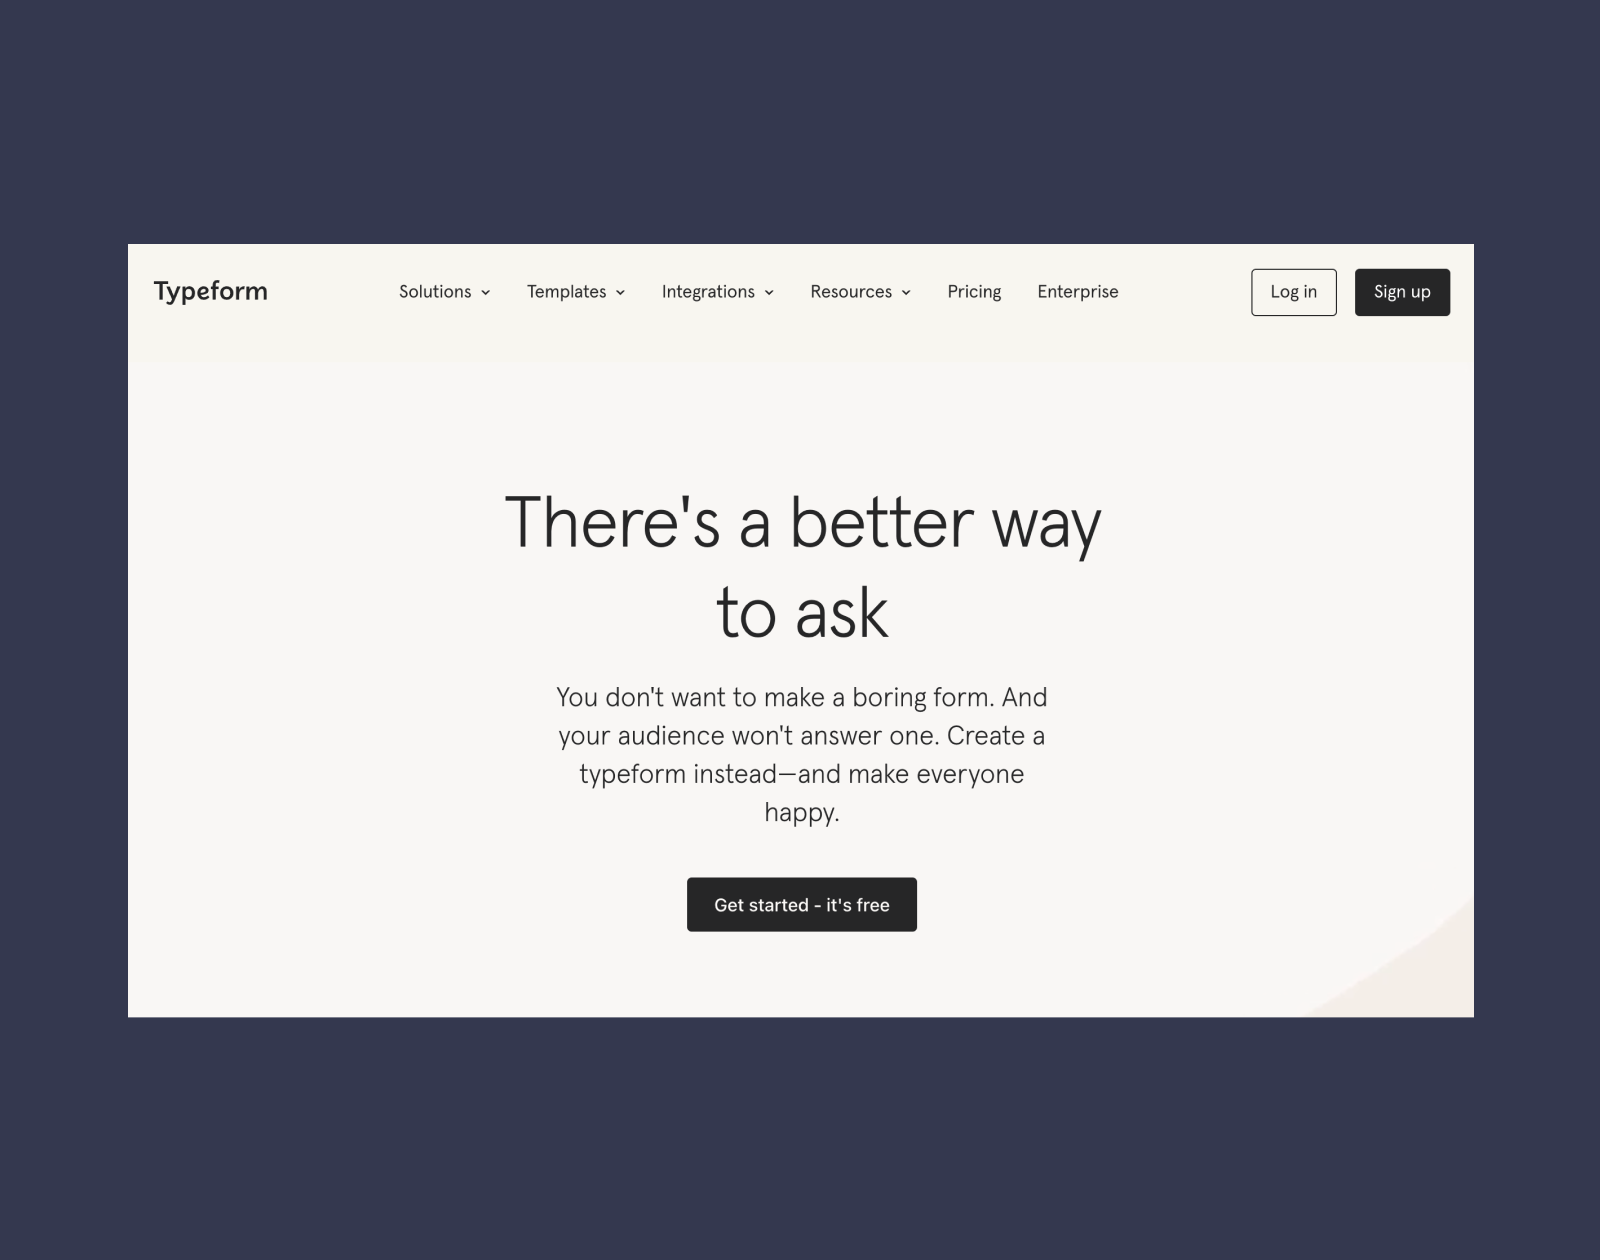 Typeform is a website for creating forms, surveys, and quizzes